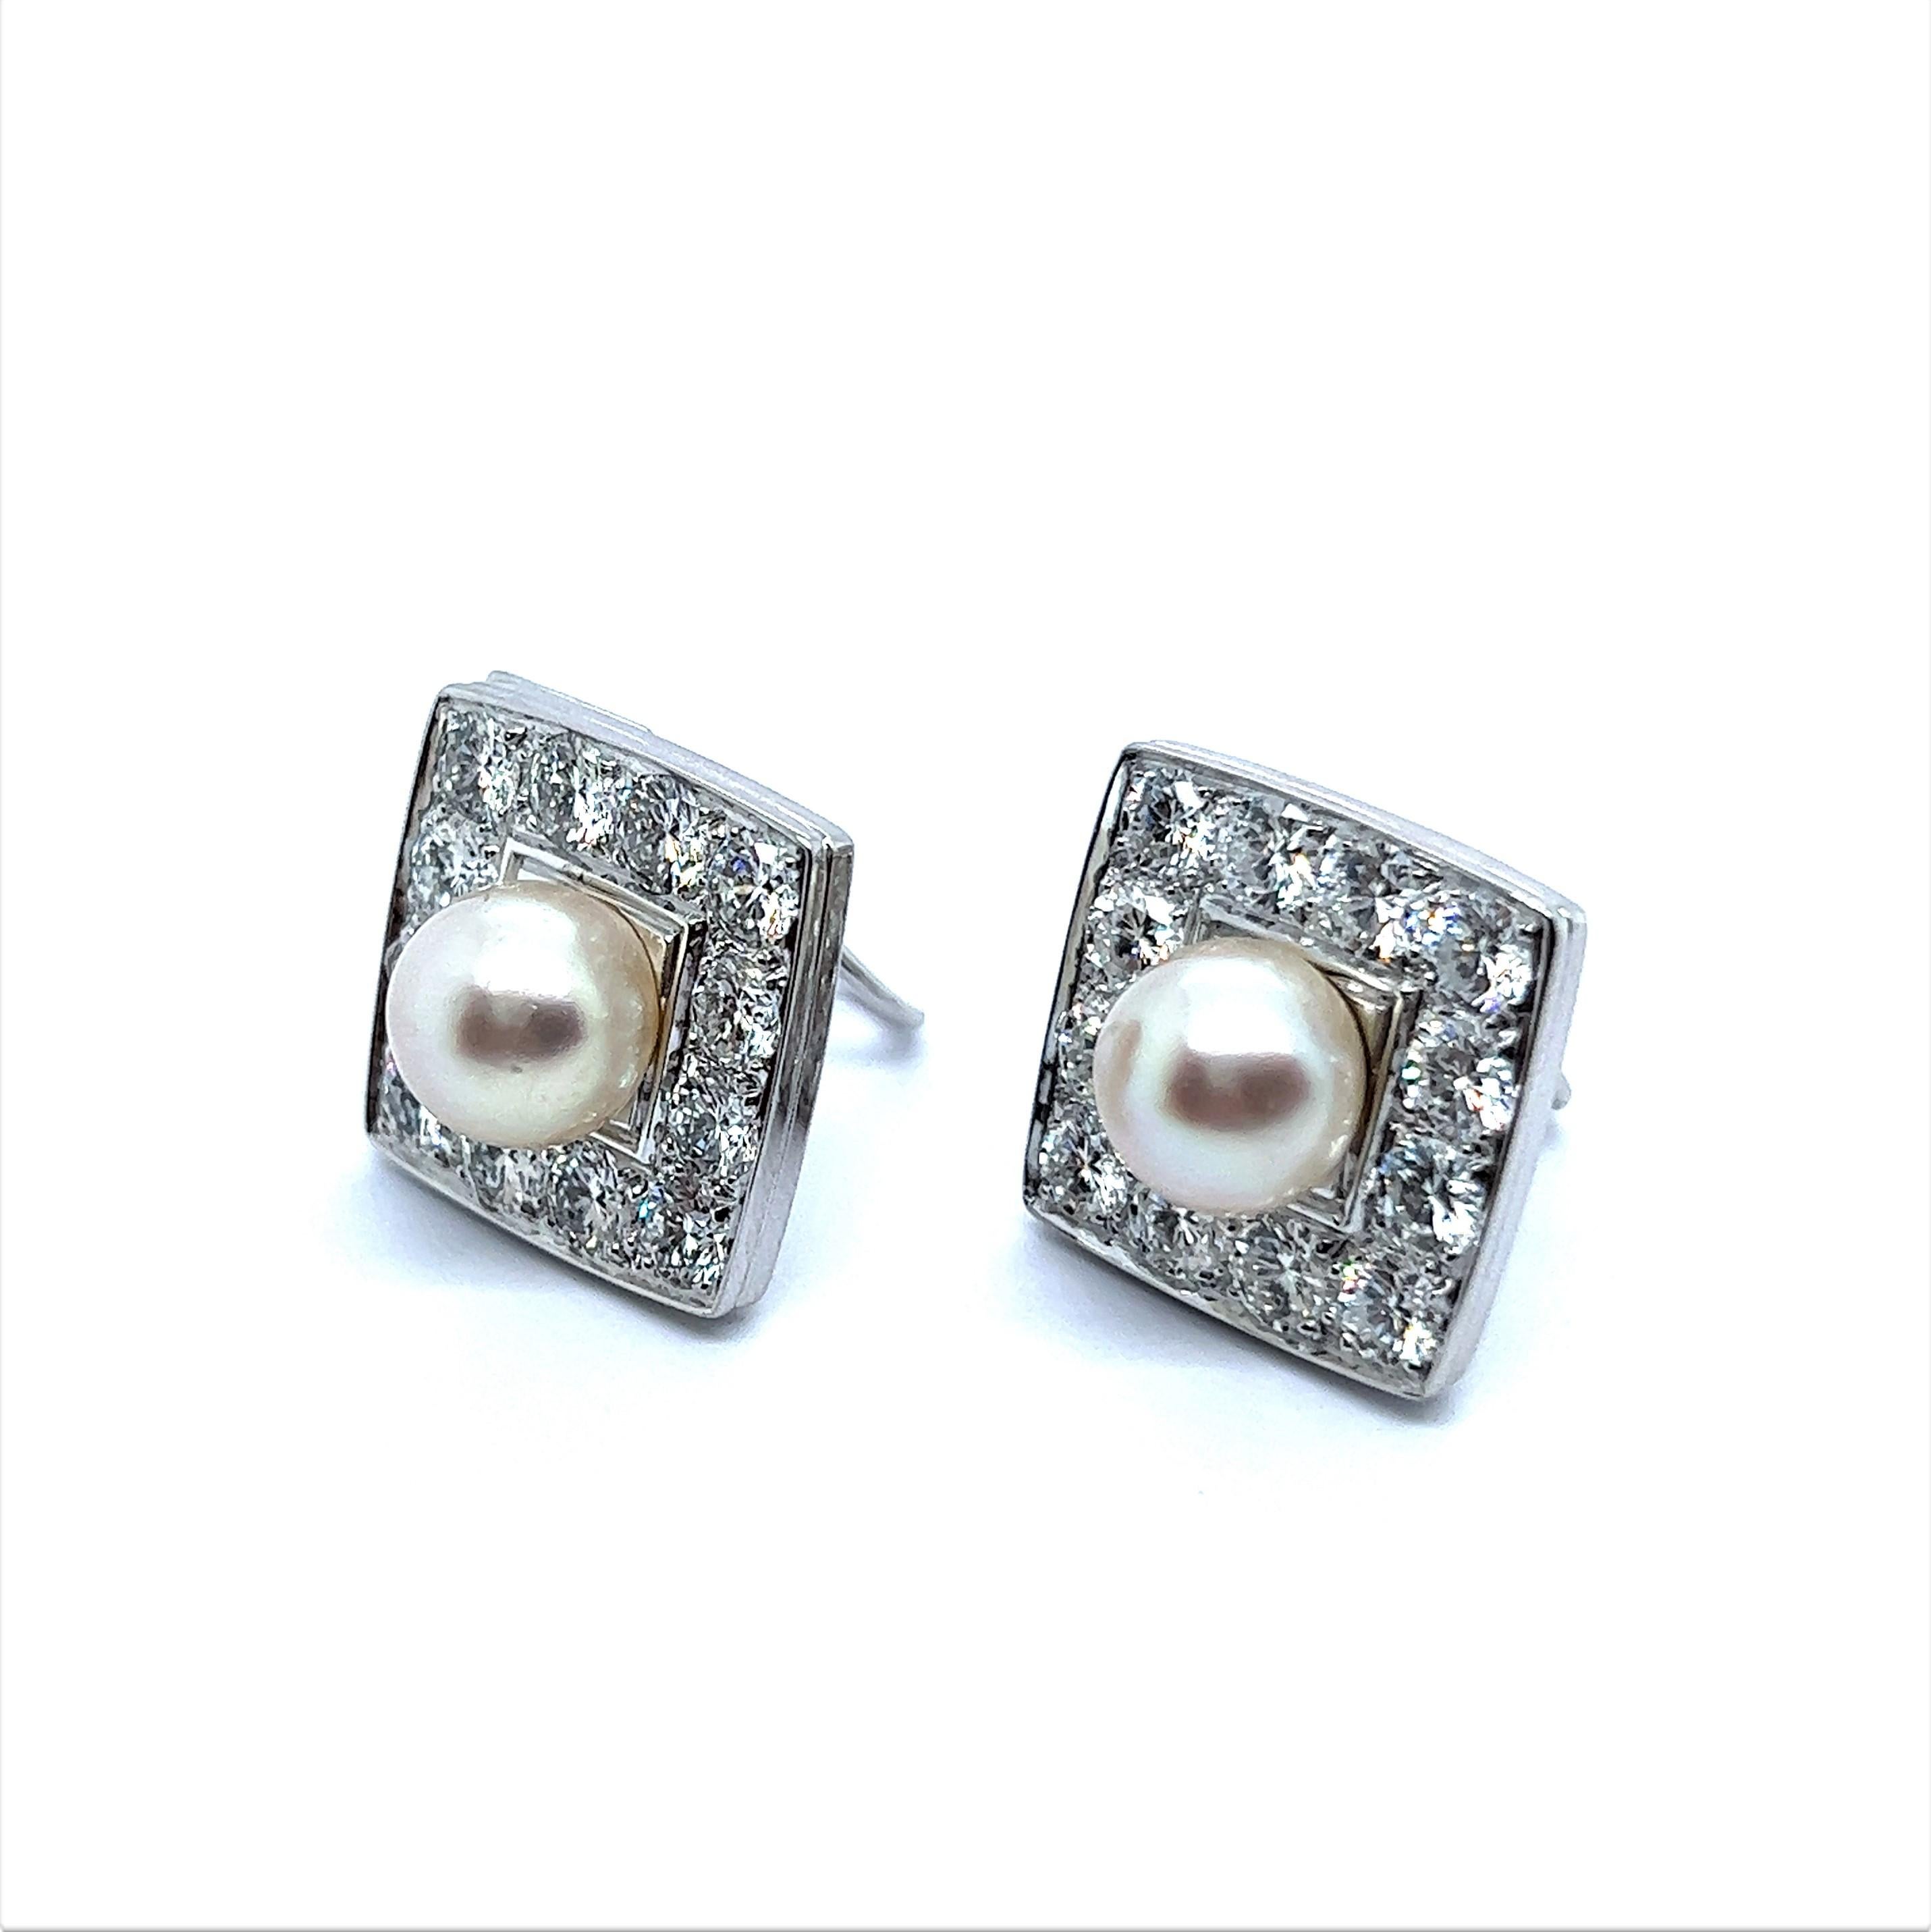 Exquisite earclips, with Diamonds and Pearls in 18 Karat White Gold. As a  true embodiment of elegance and luxury, they highlight a perfect fusion of traditional charm and contemporary design.

At the heart of each earring is a pair of creamy-hued